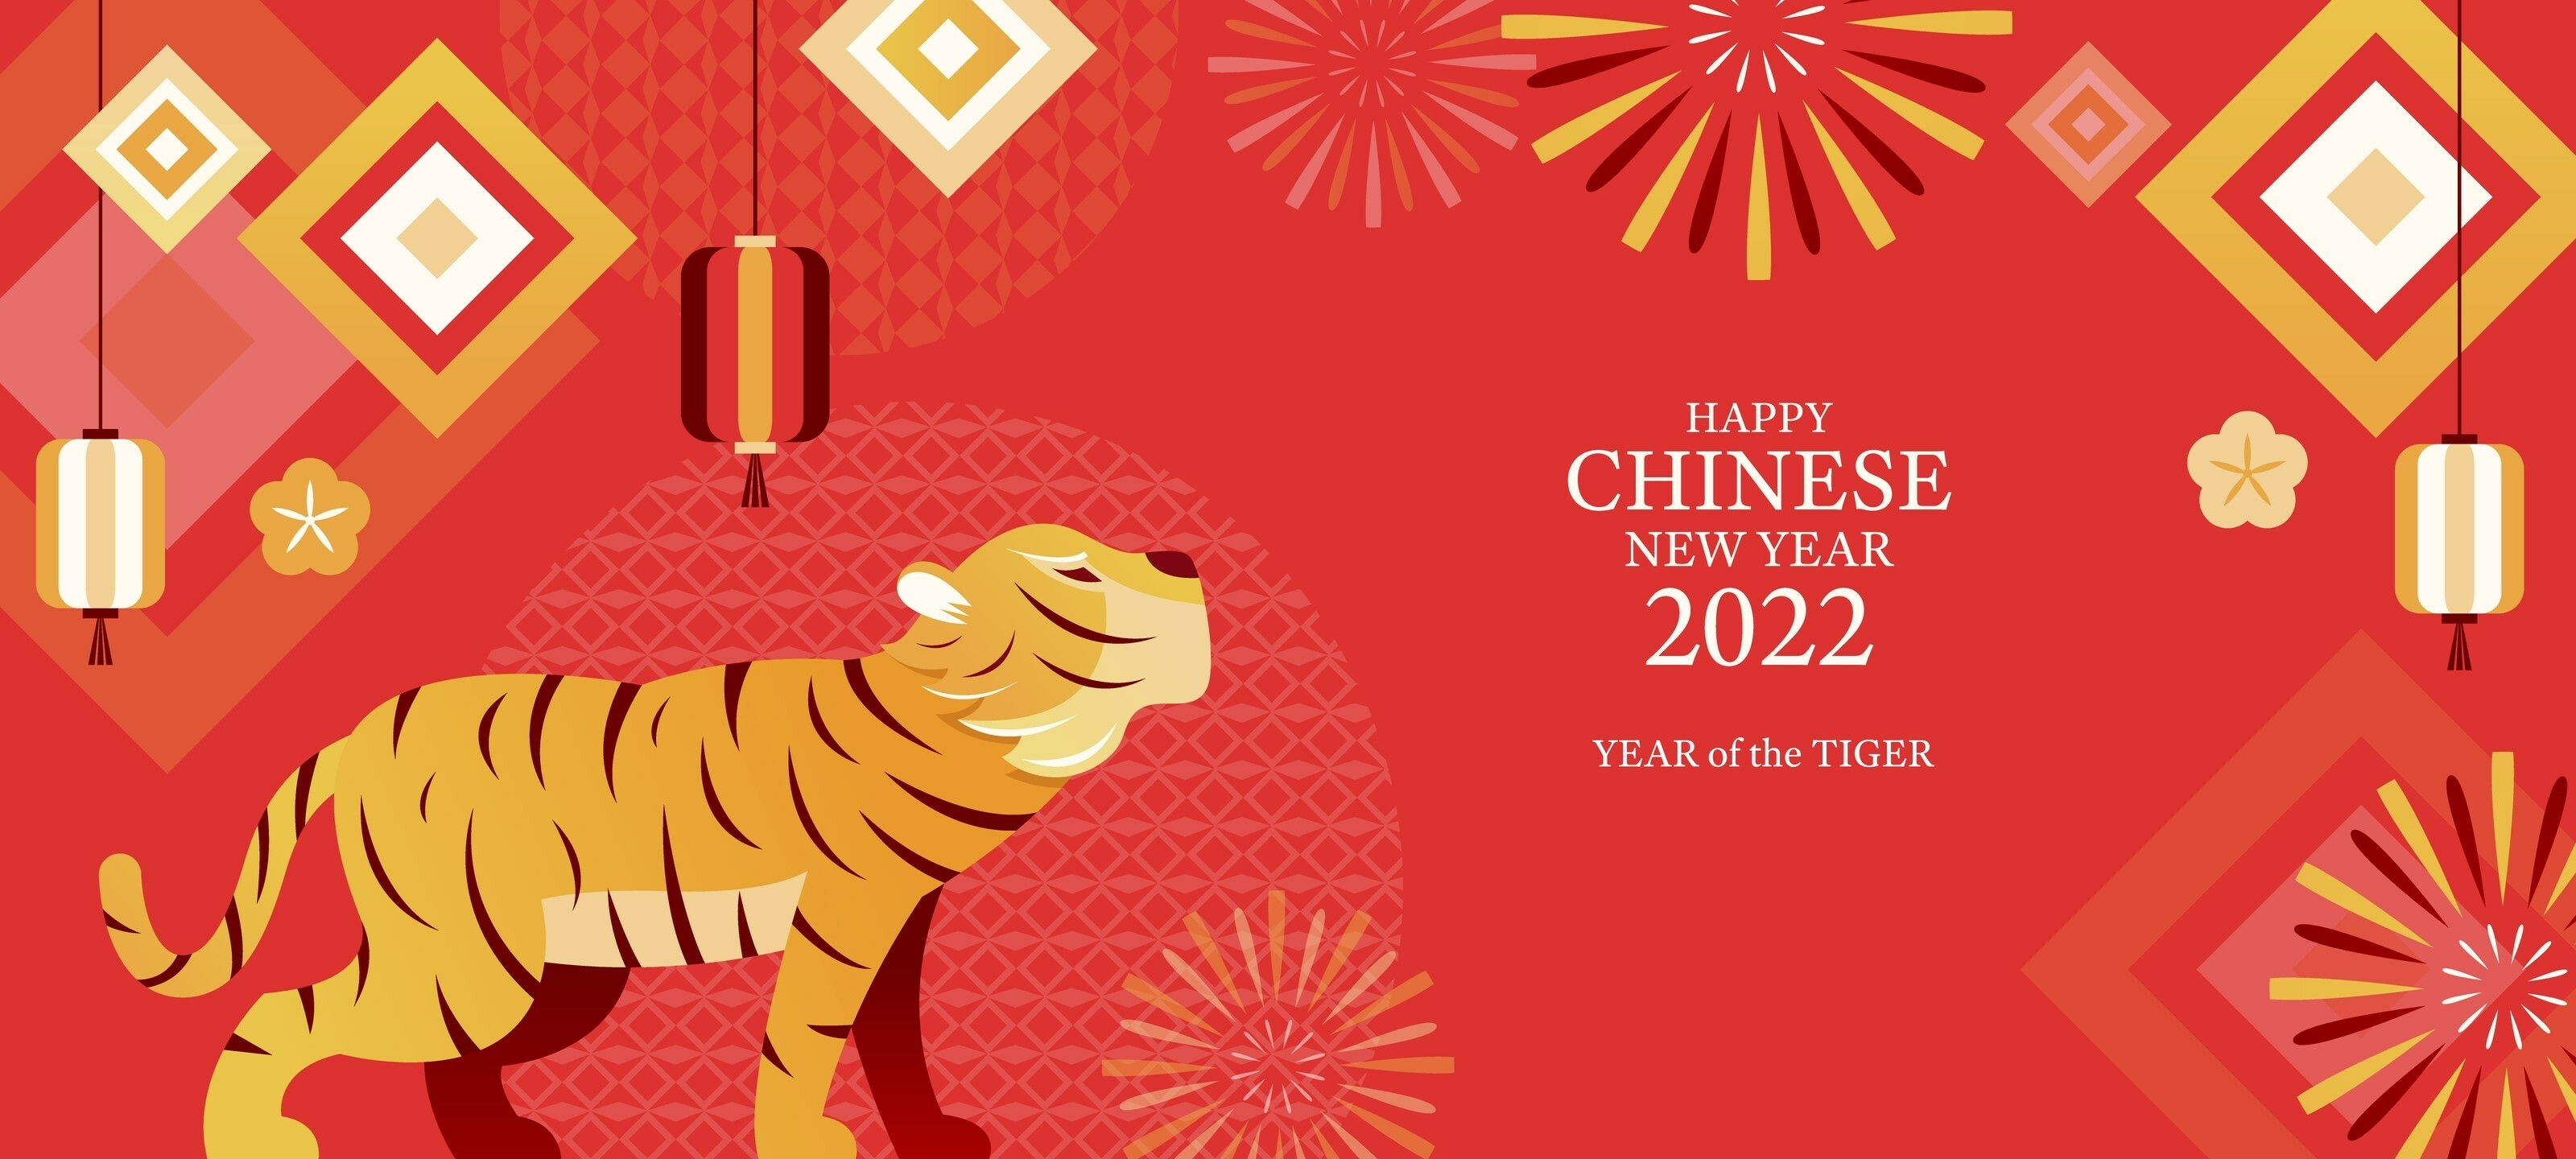 It's the Year of the Tiger! Happy Lunar New Year!